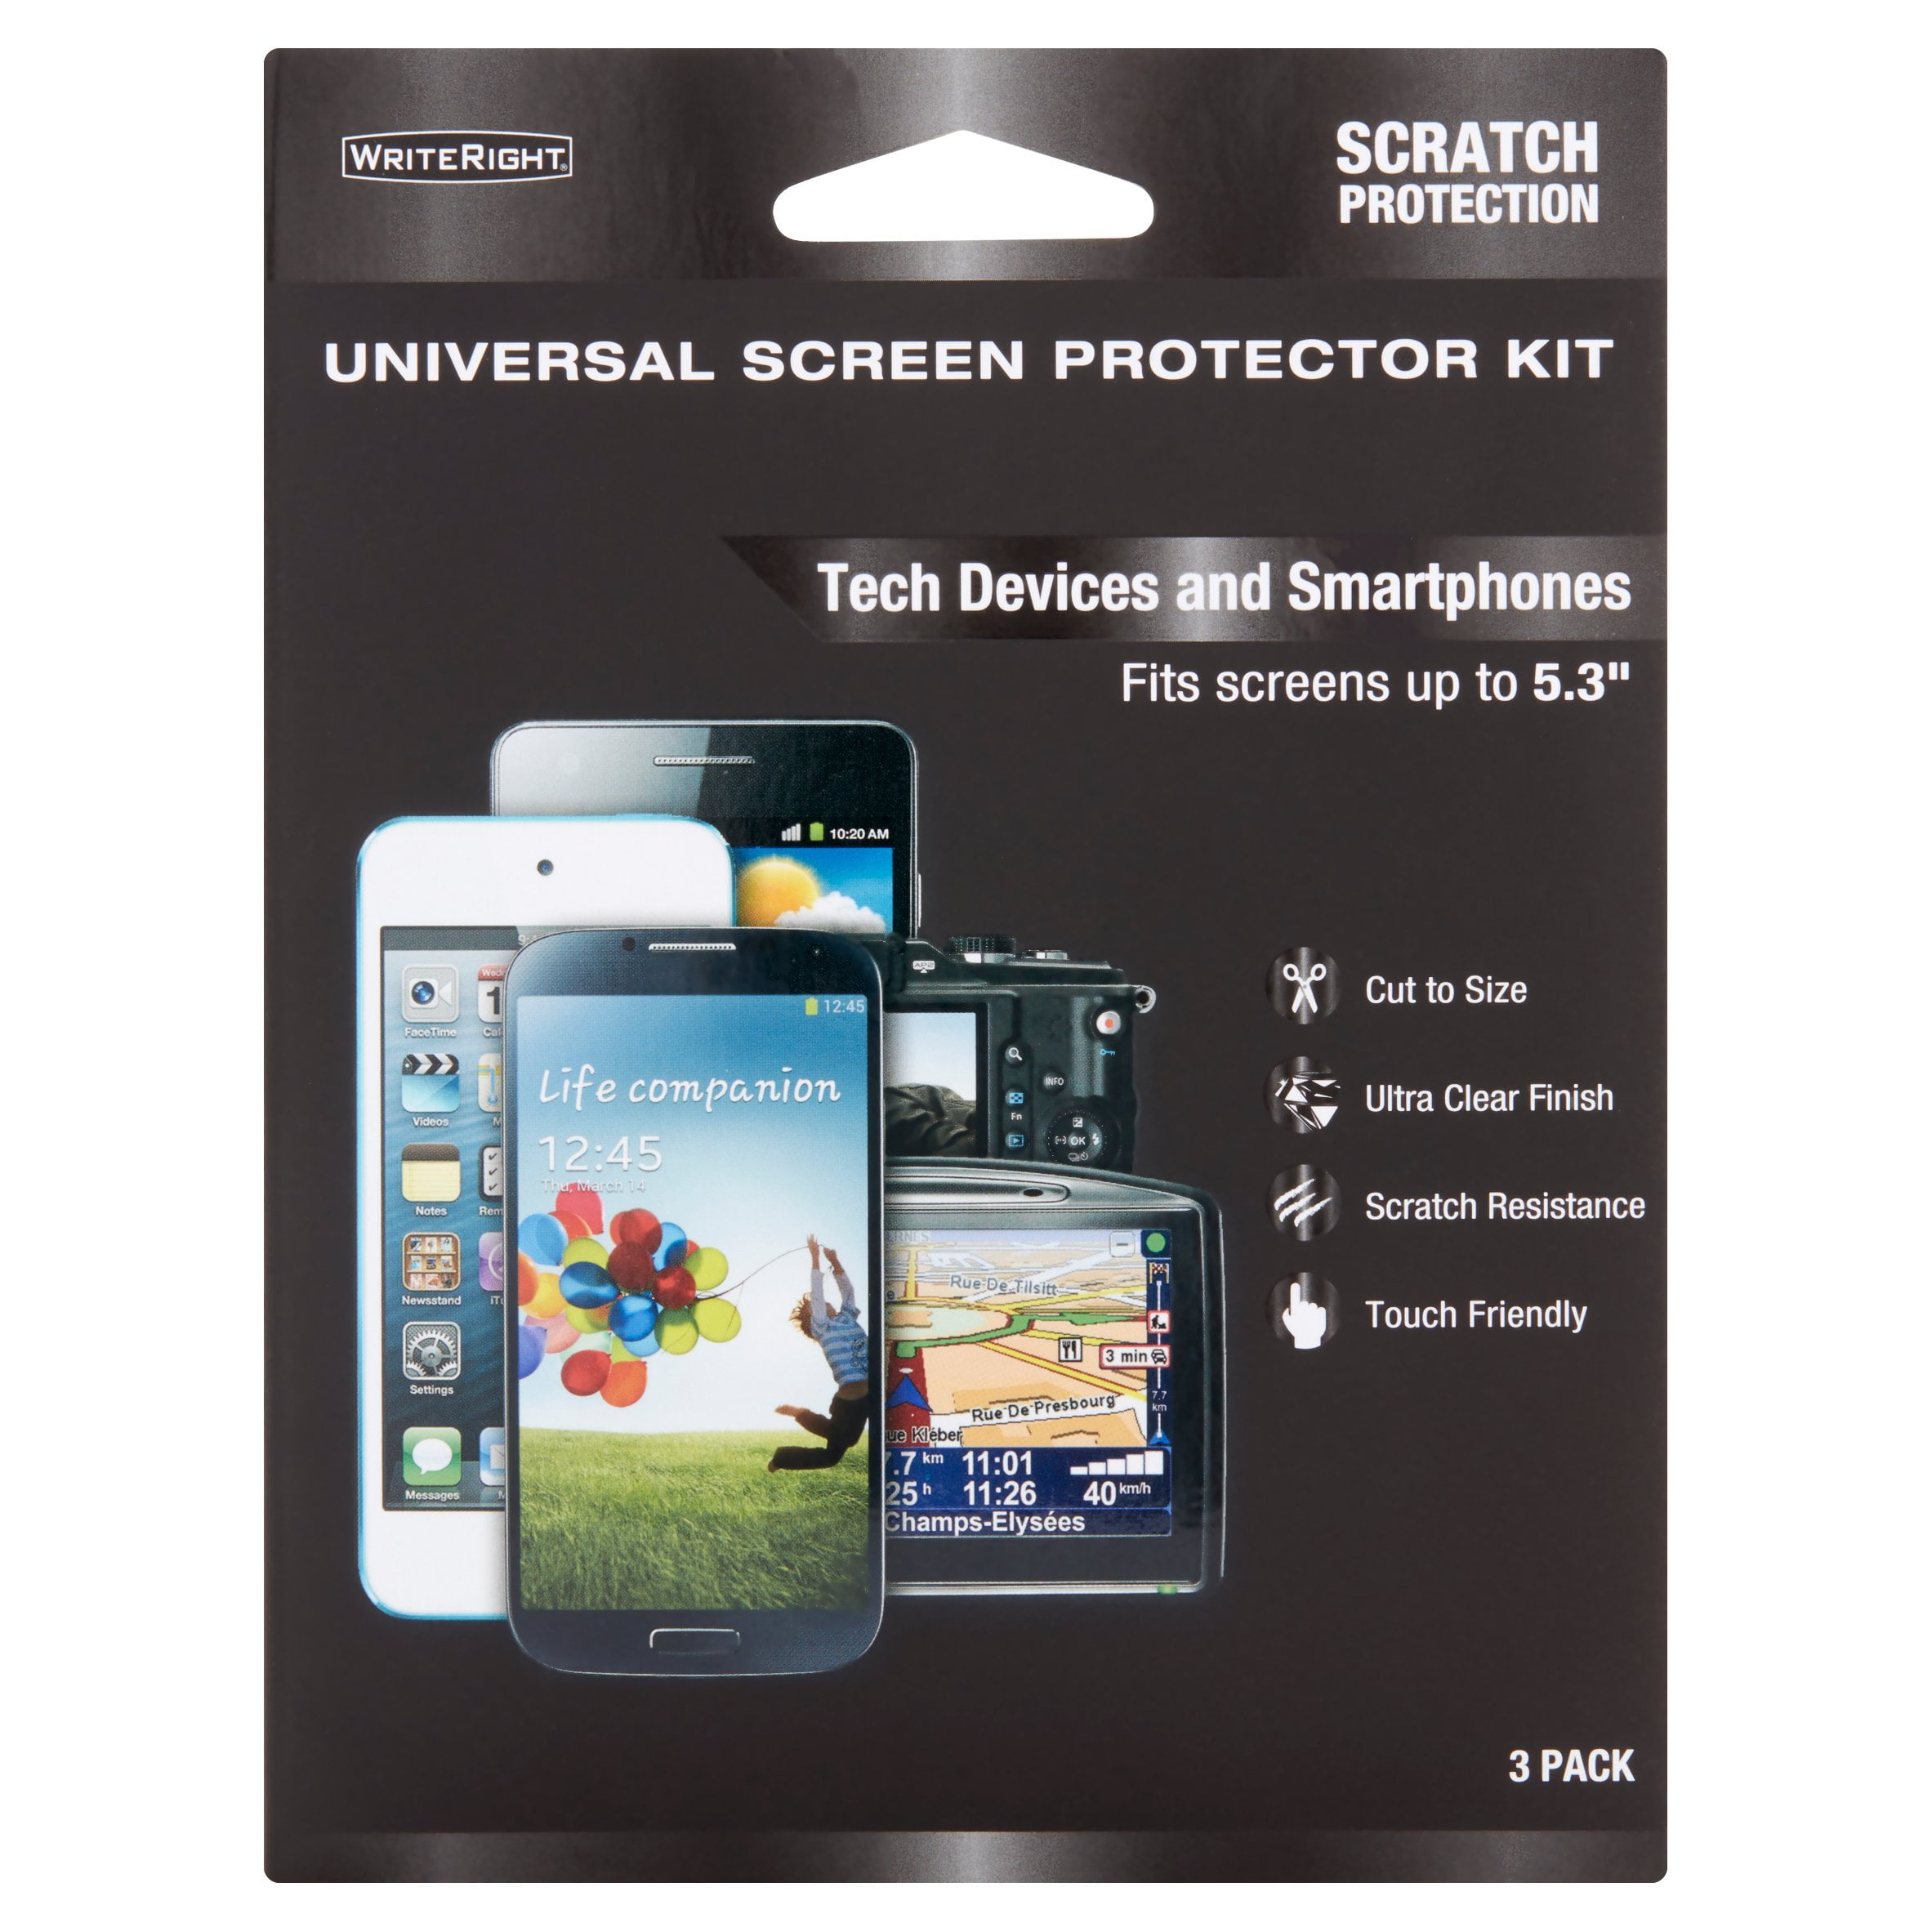 Screen protector or no screen protector, that is the question. : r